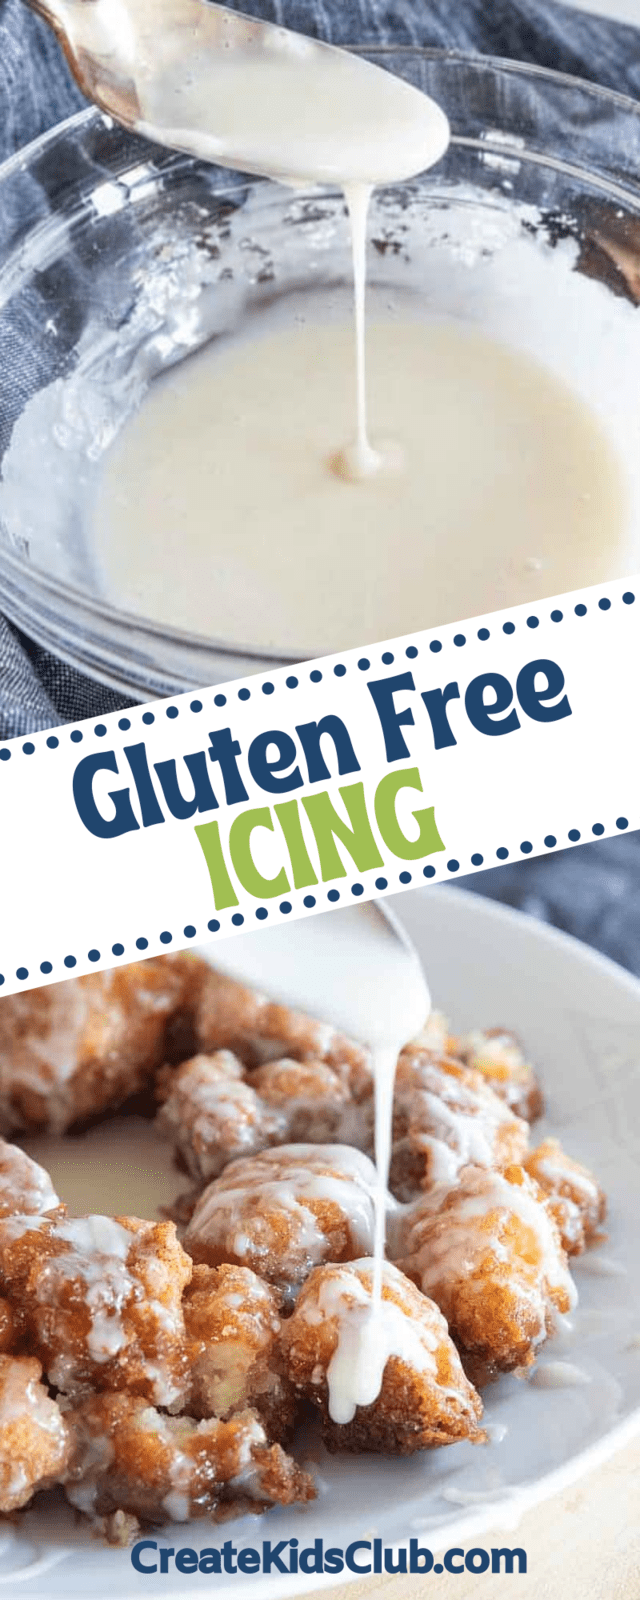 two Pinterest images of gluten free icing